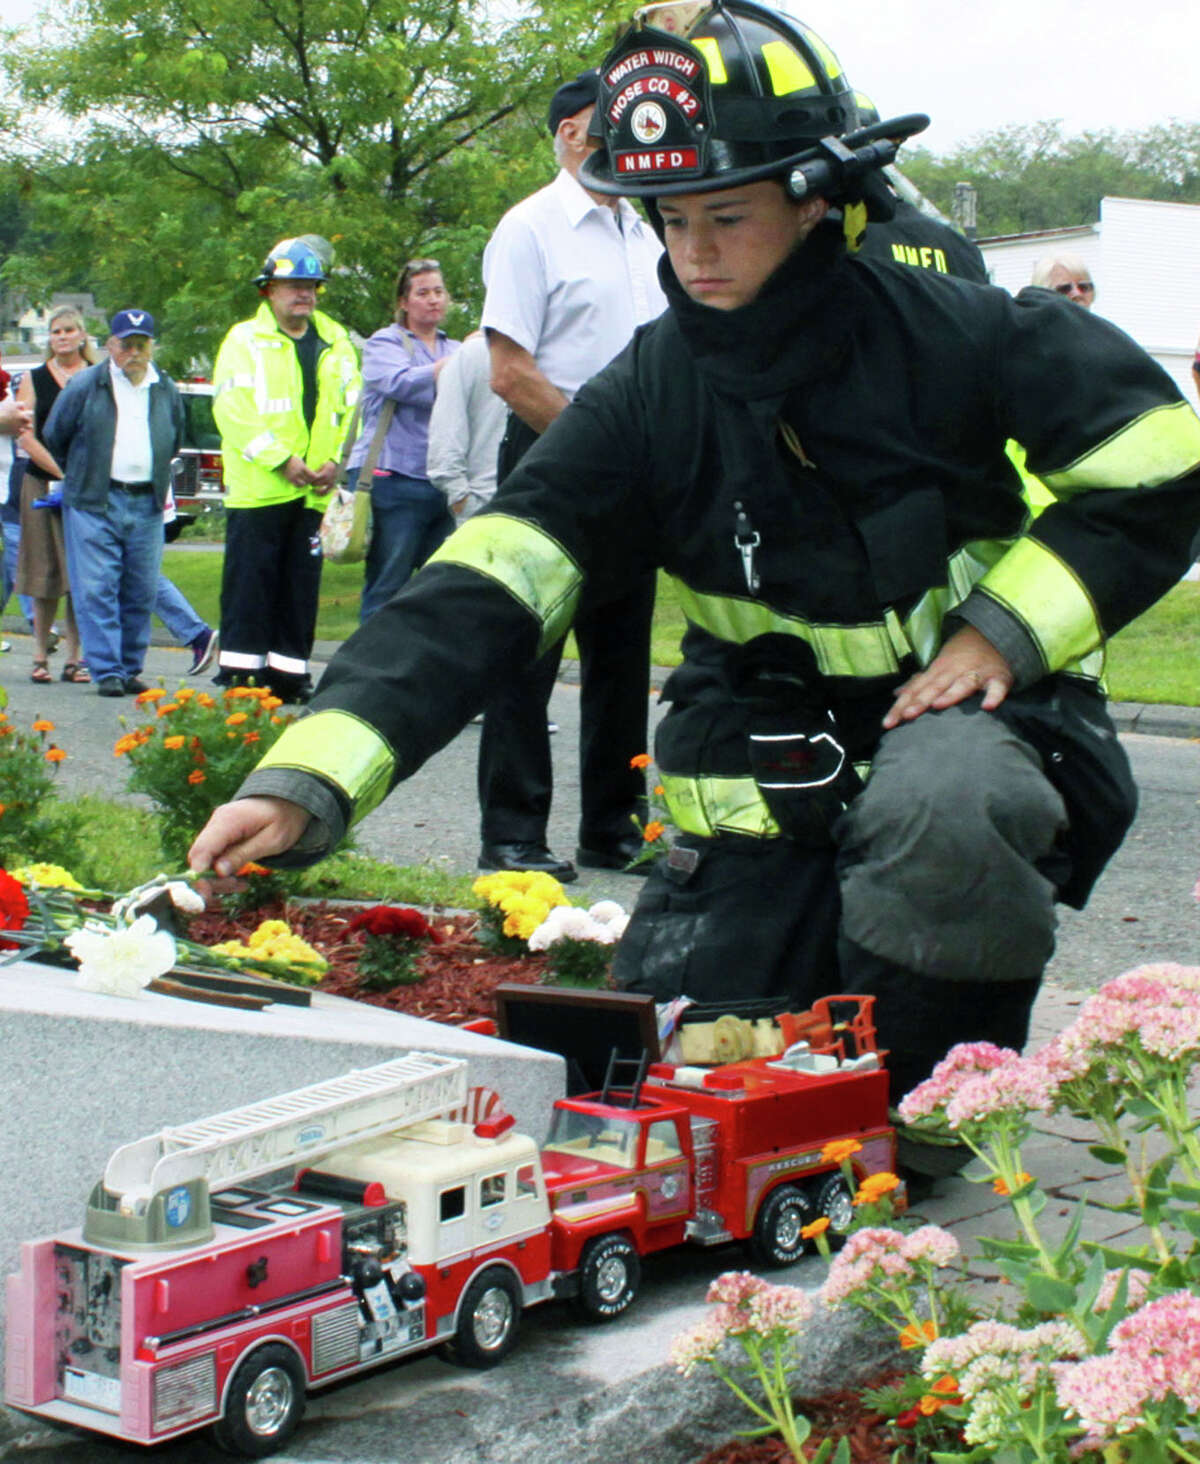 In remembrance Thirteen years after the horrific terrorist attacks on the United States, residents throughout the Greater New Milford area paid tribute to those who died in New York City, Washington D.C. and Pennsylvania. Above, Water Witch Hose Co. No. 2 firefighter Maureen Hickey places a flower on the 9/11 memorial at Patriot's Way during New Milford's annual 9/11 service. For more photos, see the Sept. 26 edition of The Spectrum and visit www.newmilfordsectrum.com. For the story and photos from Kent's 9/11 ceremony, see Page S3. September 2014